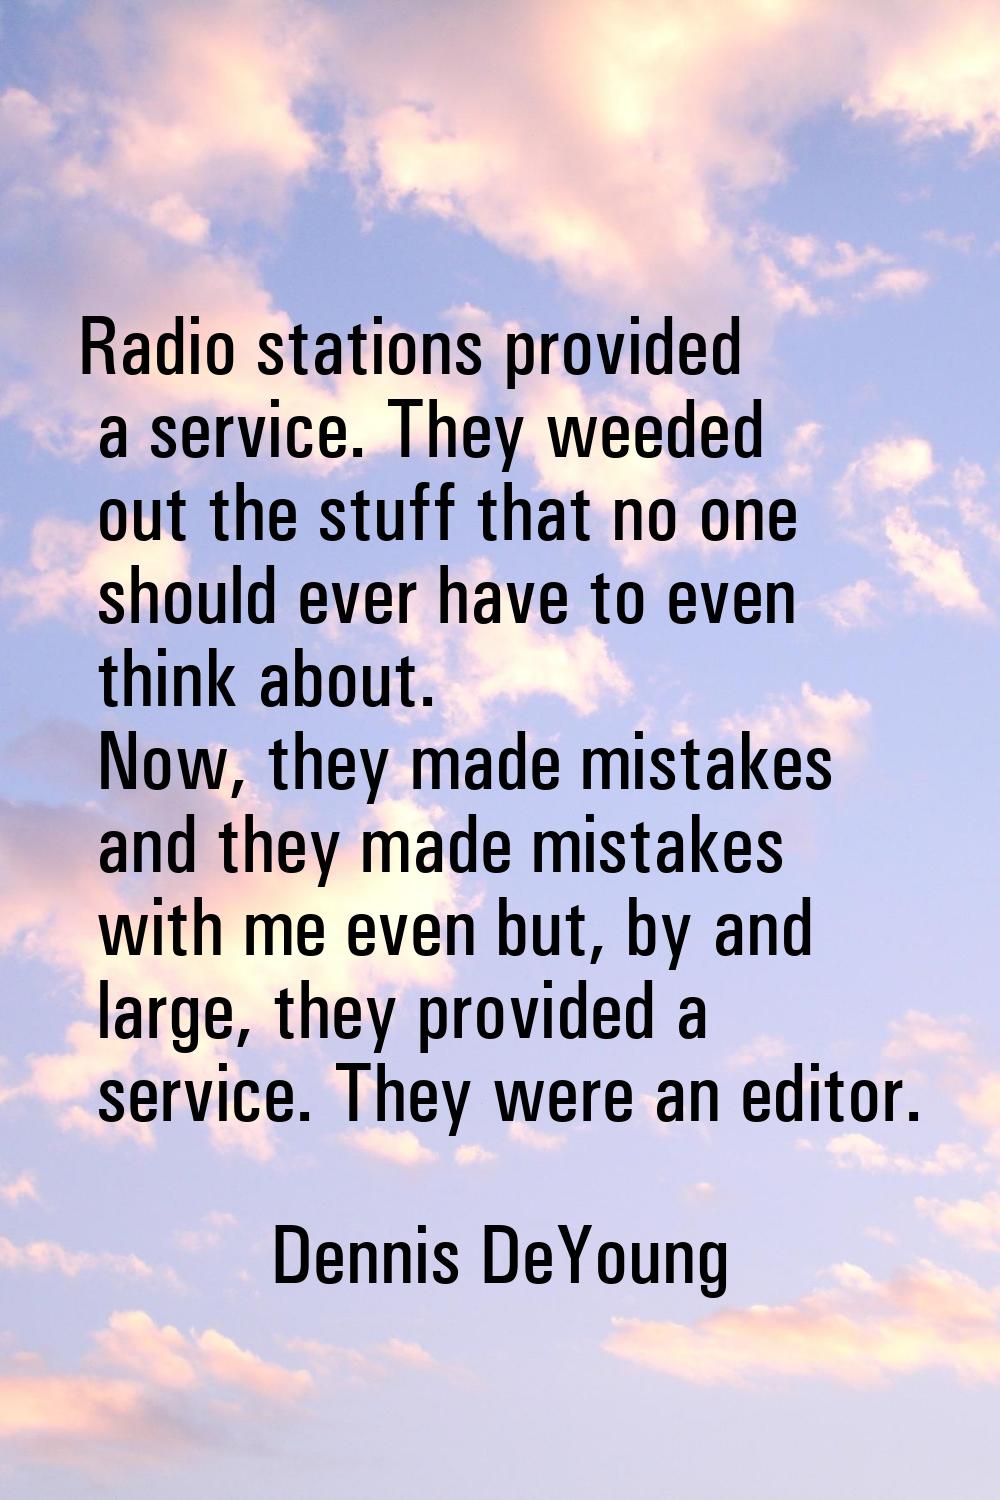 Radio stations provided a service. They weeded out the stuff that no one should ever have to even t